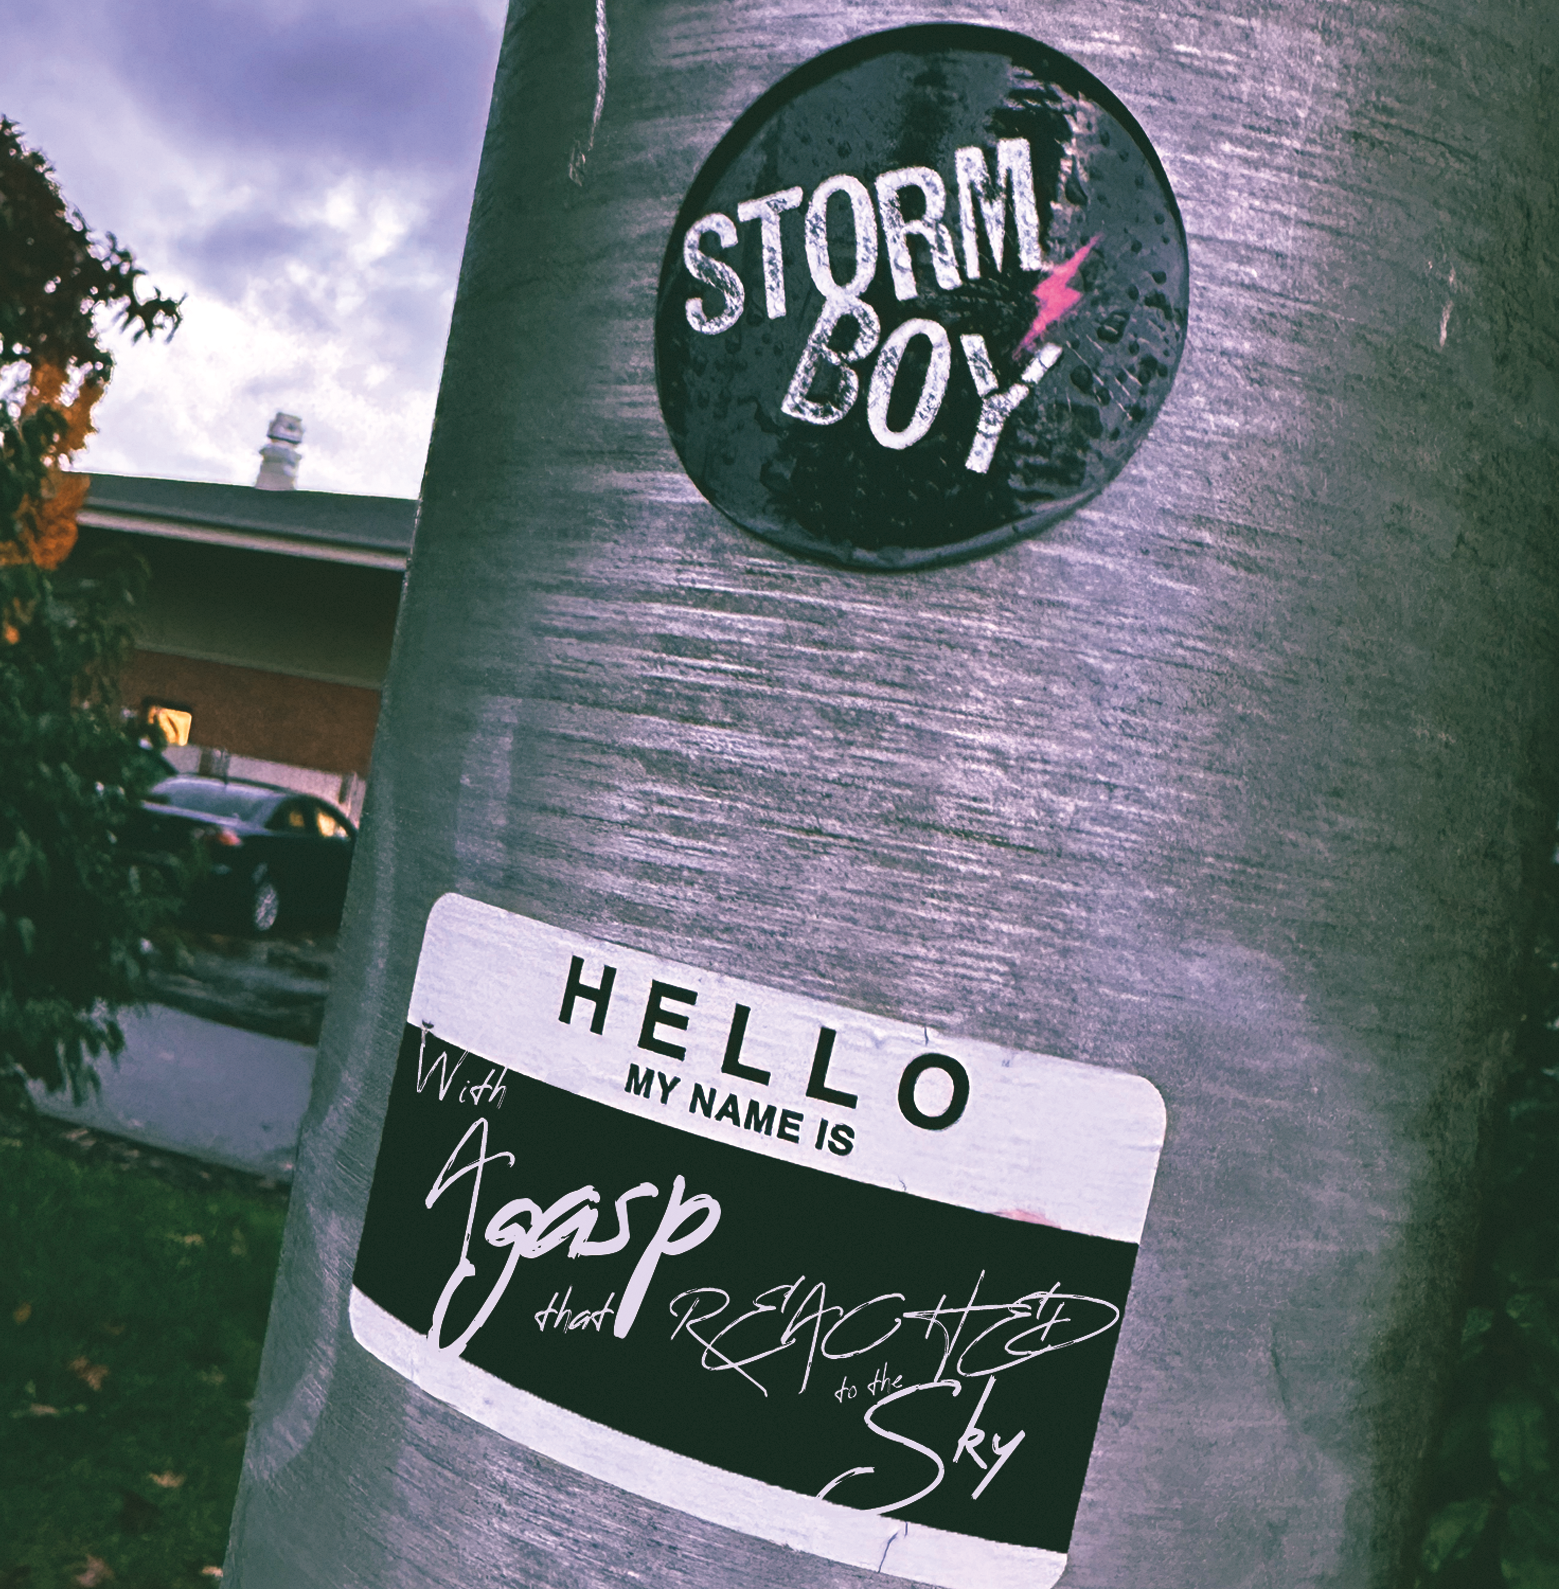 Storm Boy – With a Gasp that Reached to the Sky